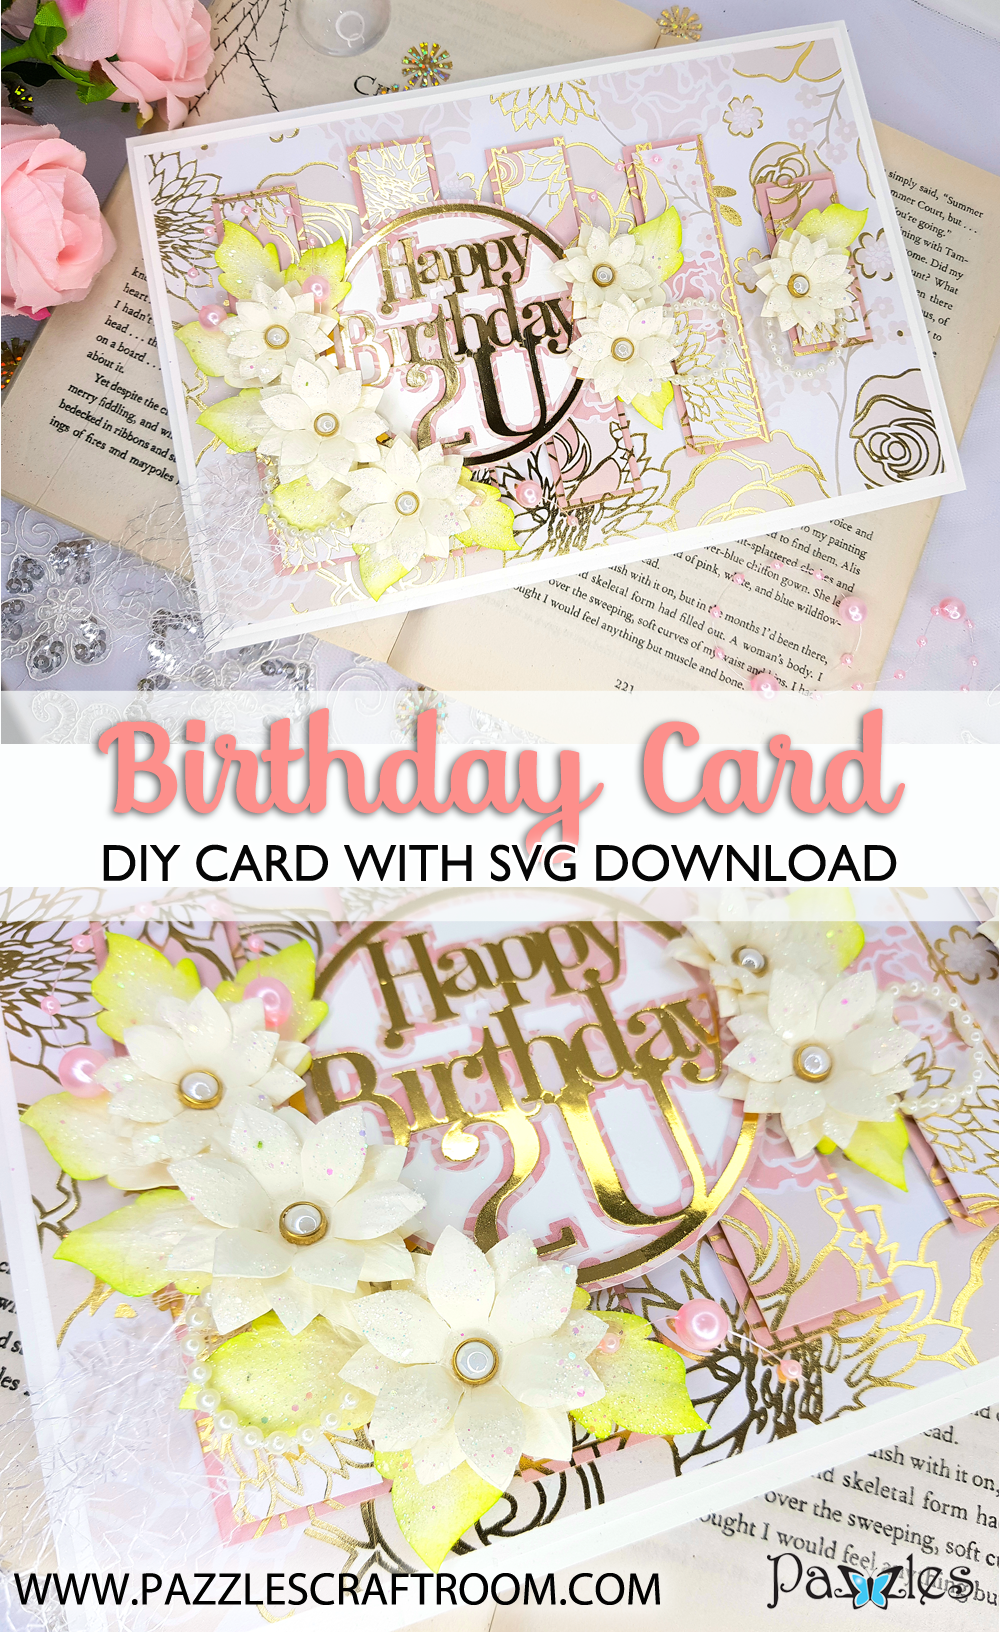 Download Elegant DIY Birthday Card with instant SVG download - Pazzles